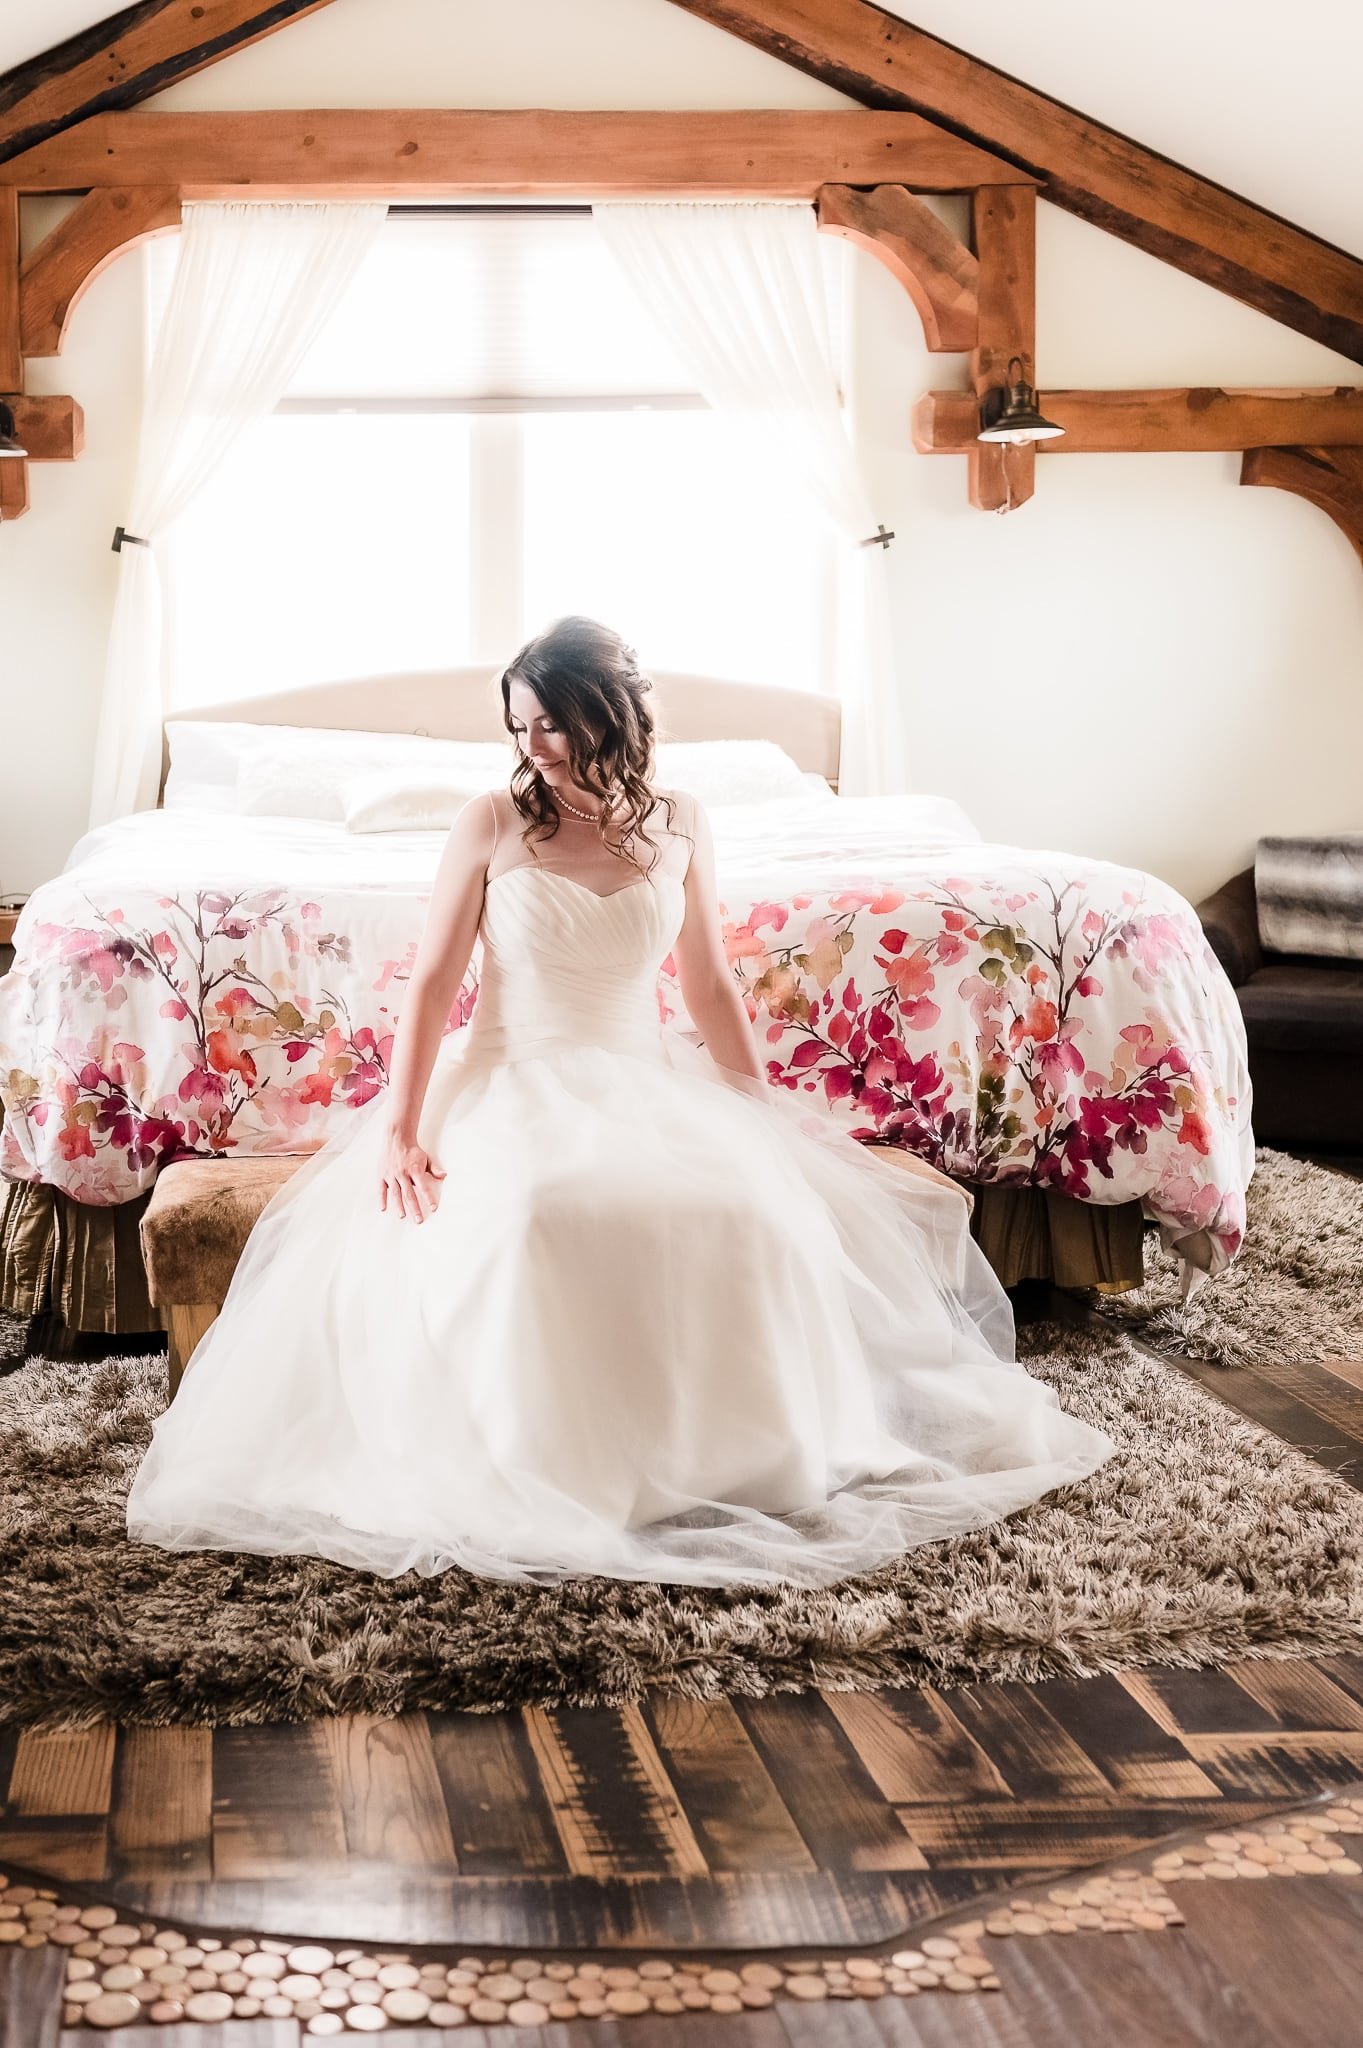 The bride sits on a bench in front of the bed with beautiful window light behind her in the getting ready room at 1C Barn, Monument, Colorado.